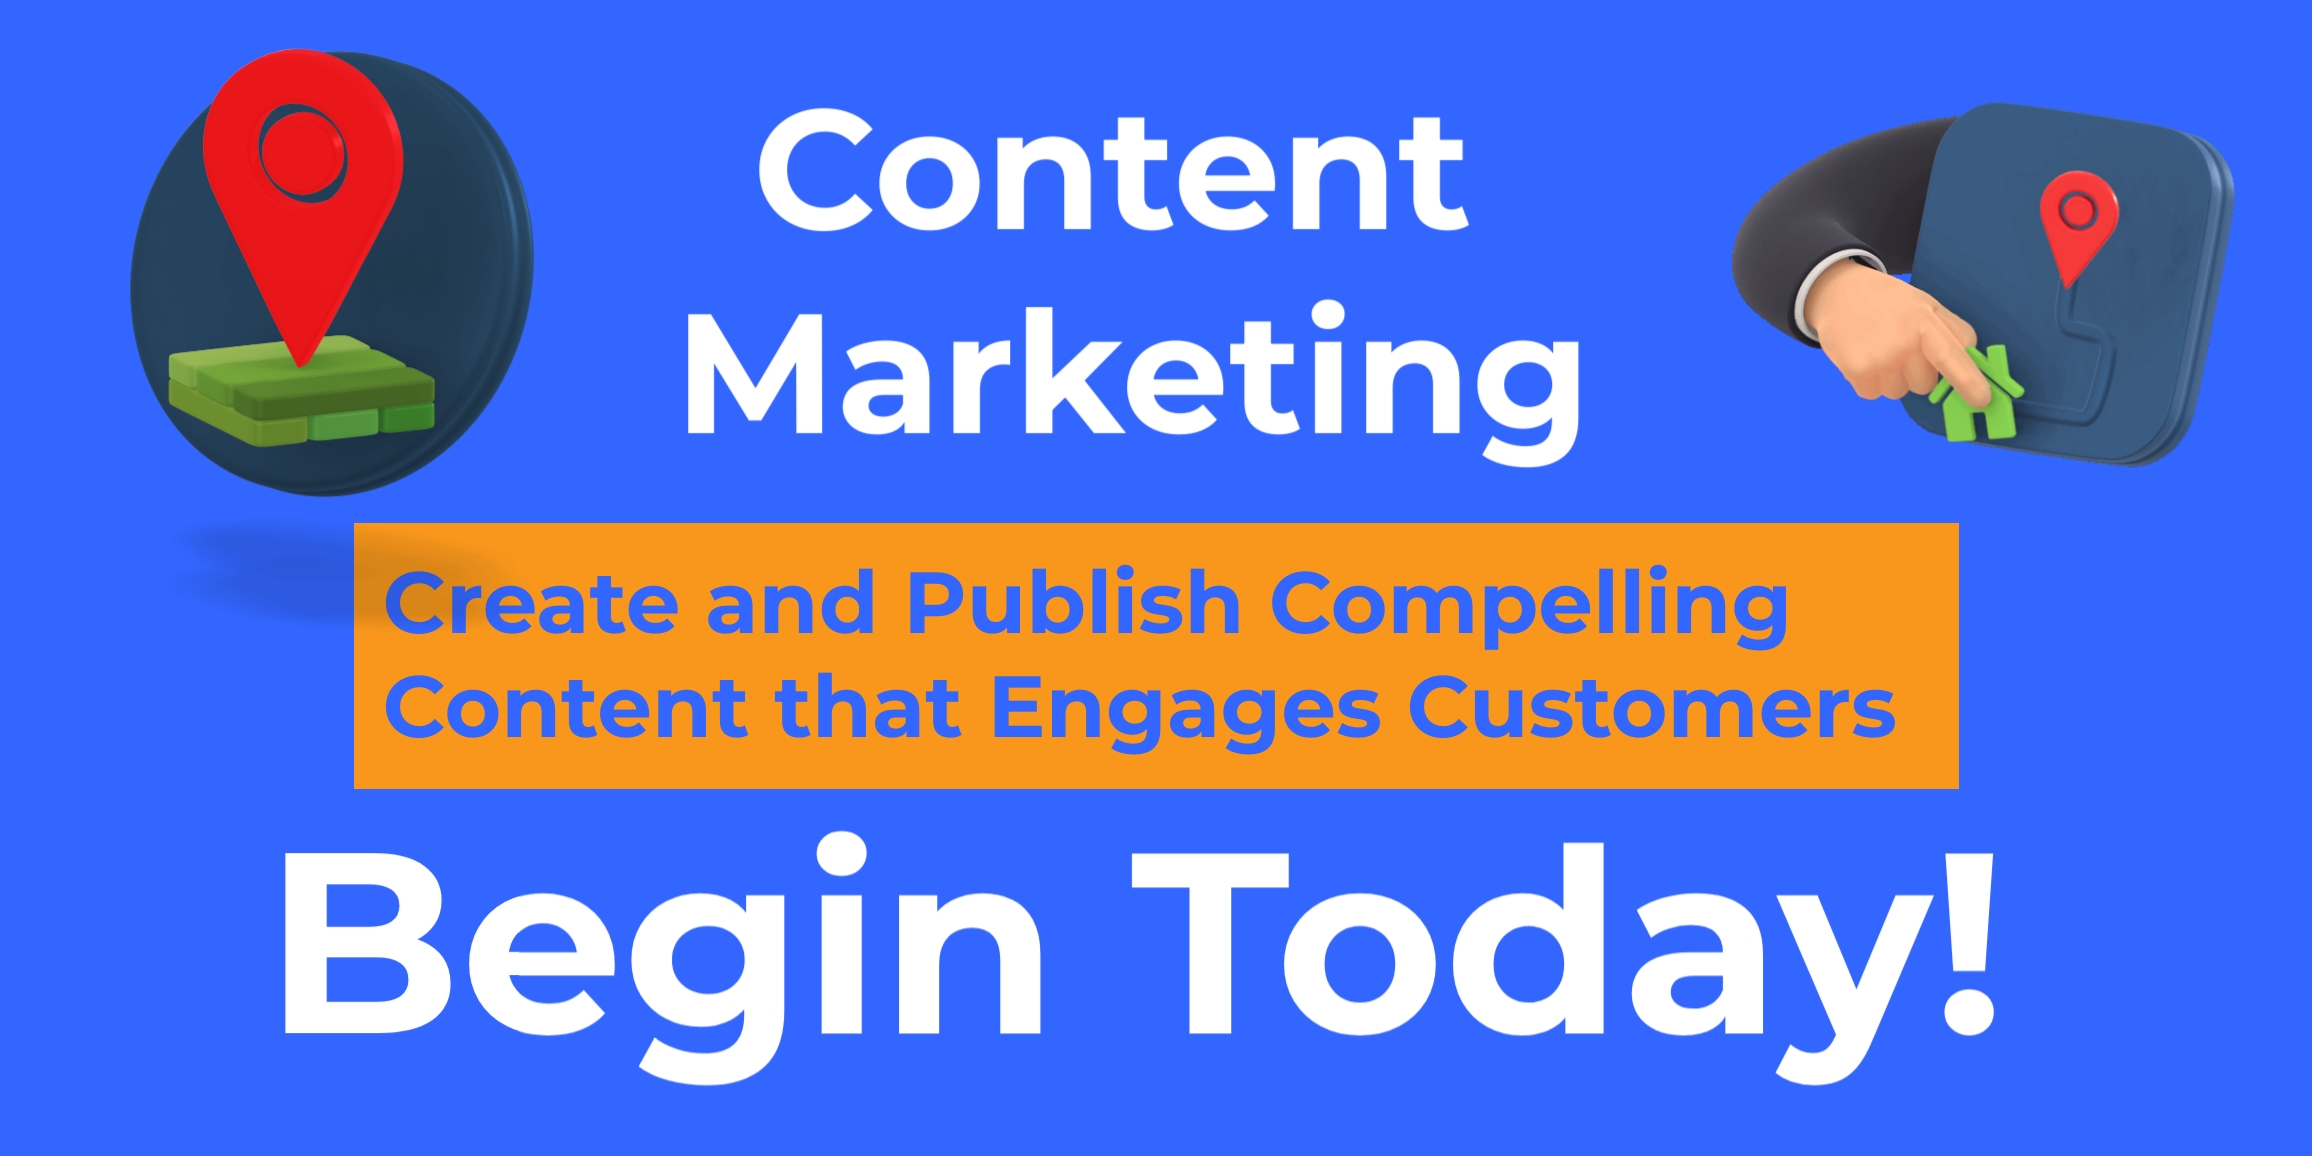 Your Need Content. We Can Help Create Engaging Content